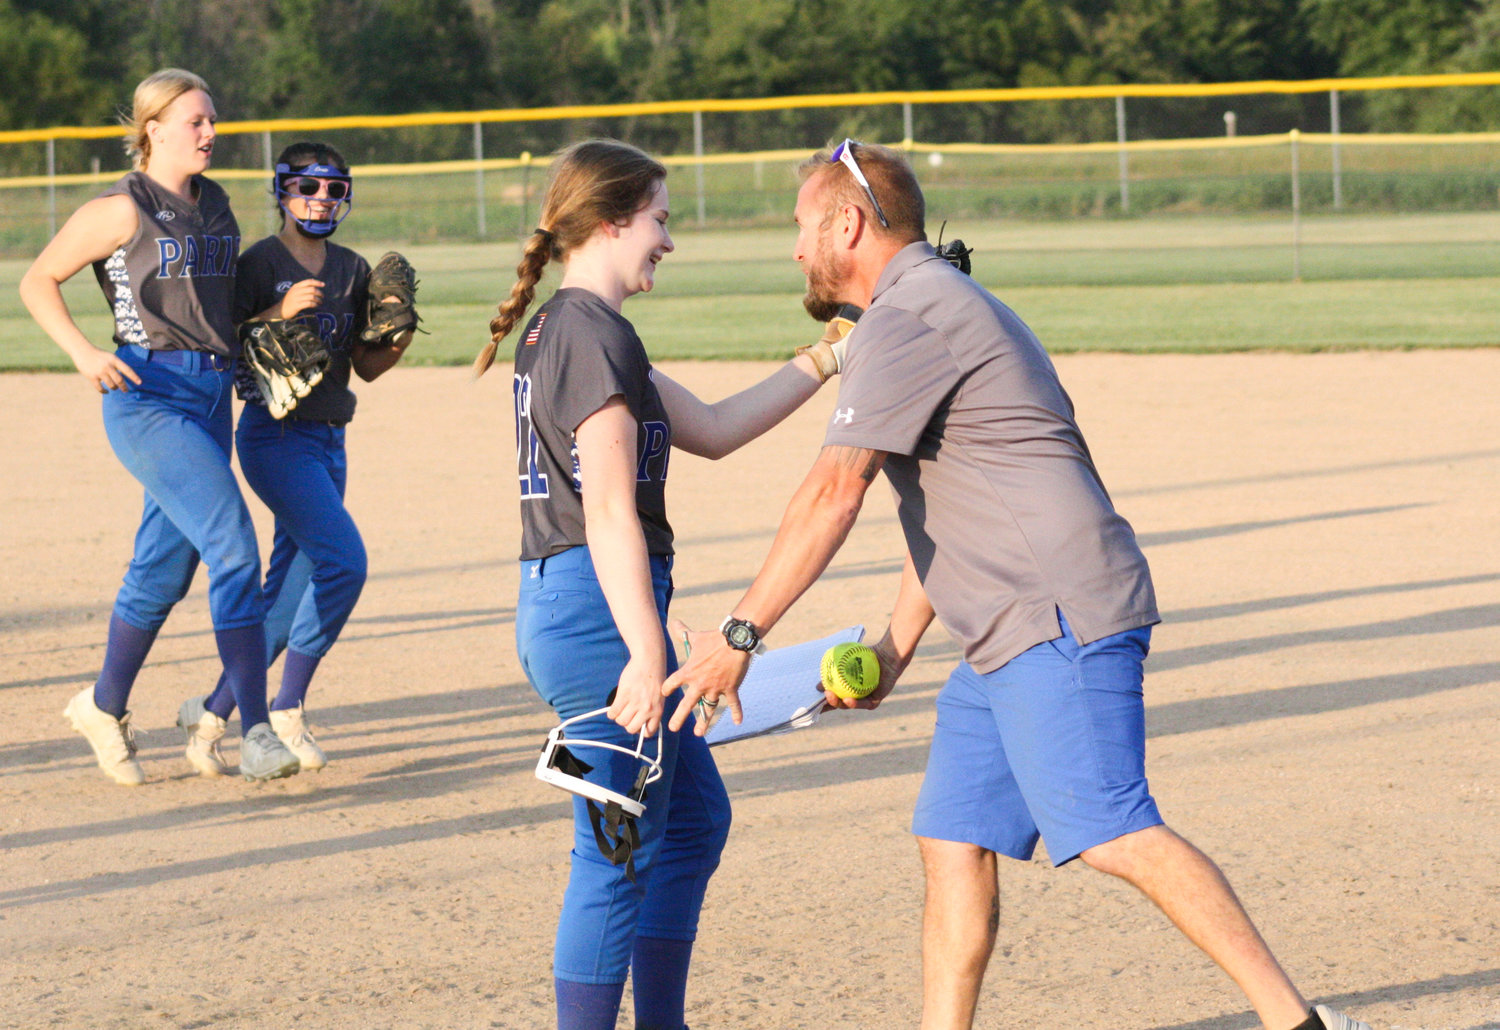 Paris sophomore pitcher Kennedy Ashenfelter is congratulated by head coach Collin Huffman after finishing a complete game shutout Sept. 14 at Community R-6. Ashenfelter no-hit Madison in what was the first of two district victories for the Lady Coyotes.